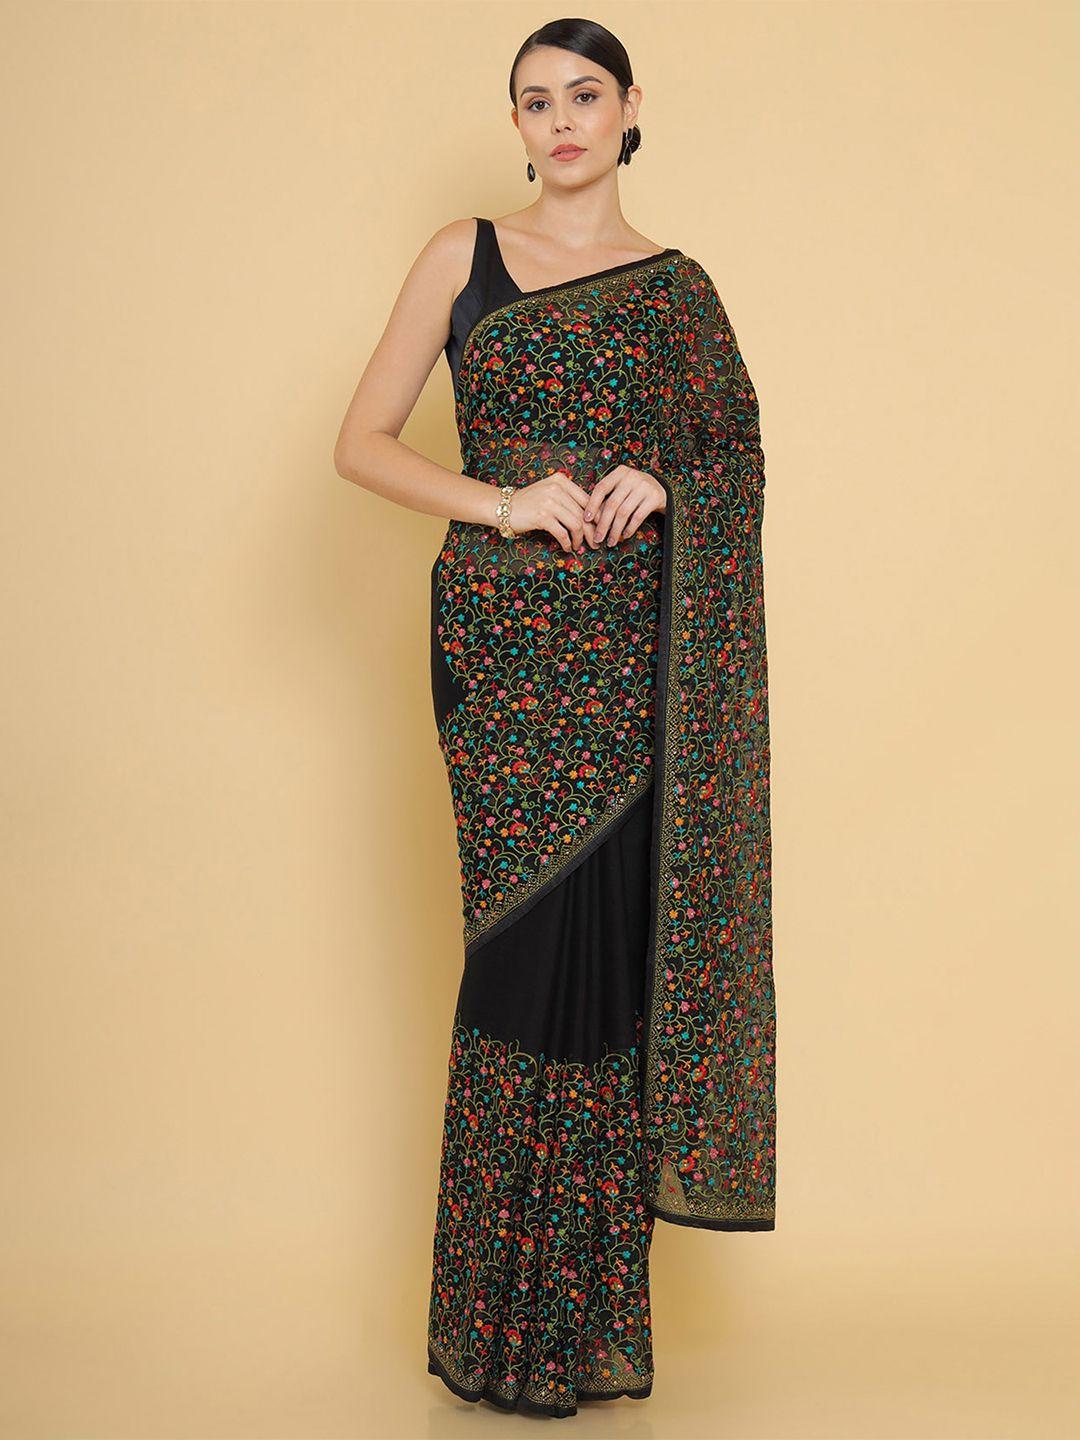 Soch Black Chiffon Saree With Floral Embroidery And Embellished Borders